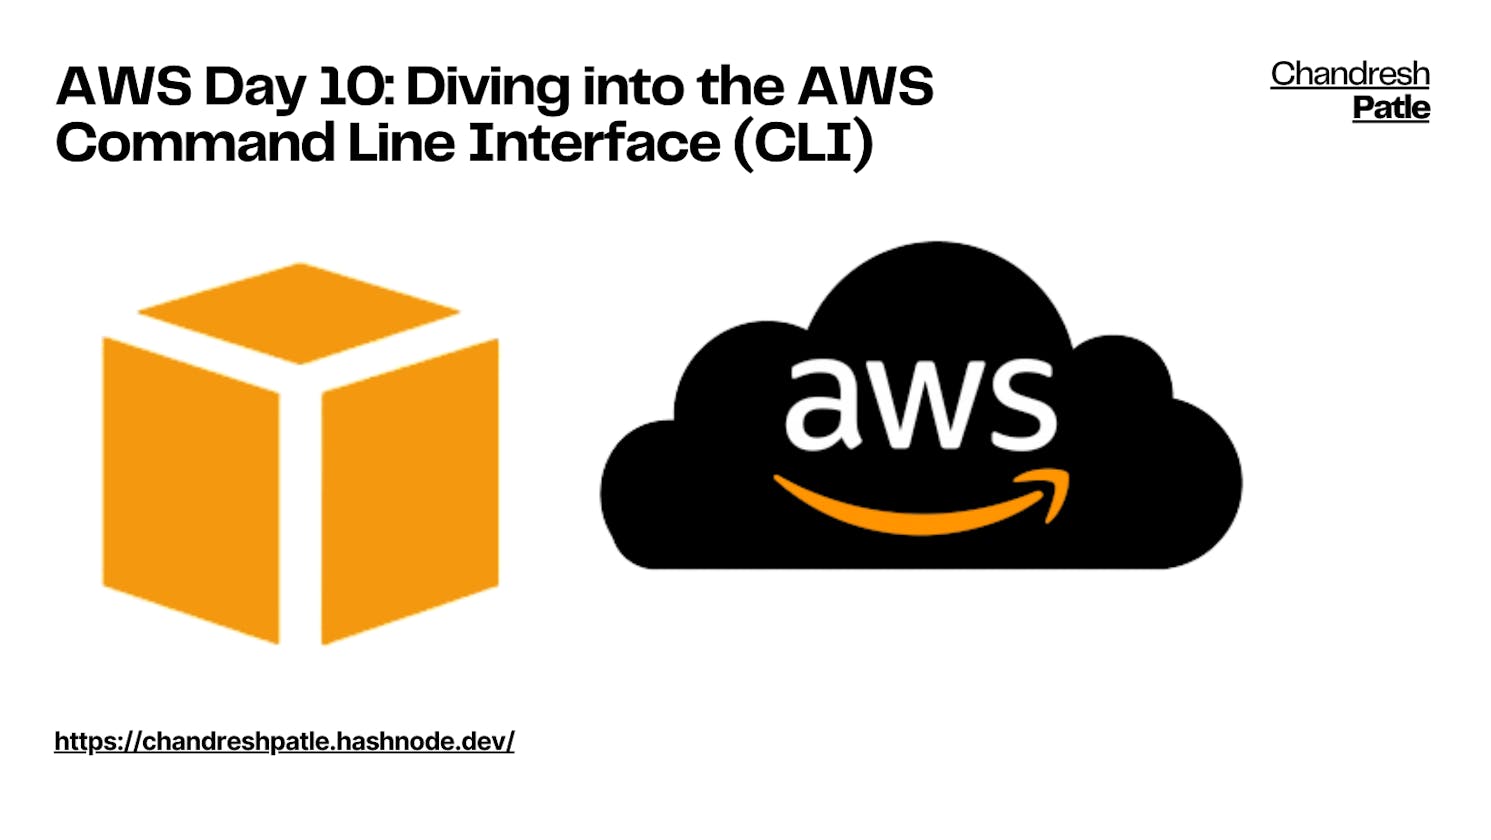 AWS Day 10: Diving into the AWS Command Line Interface (CLI)